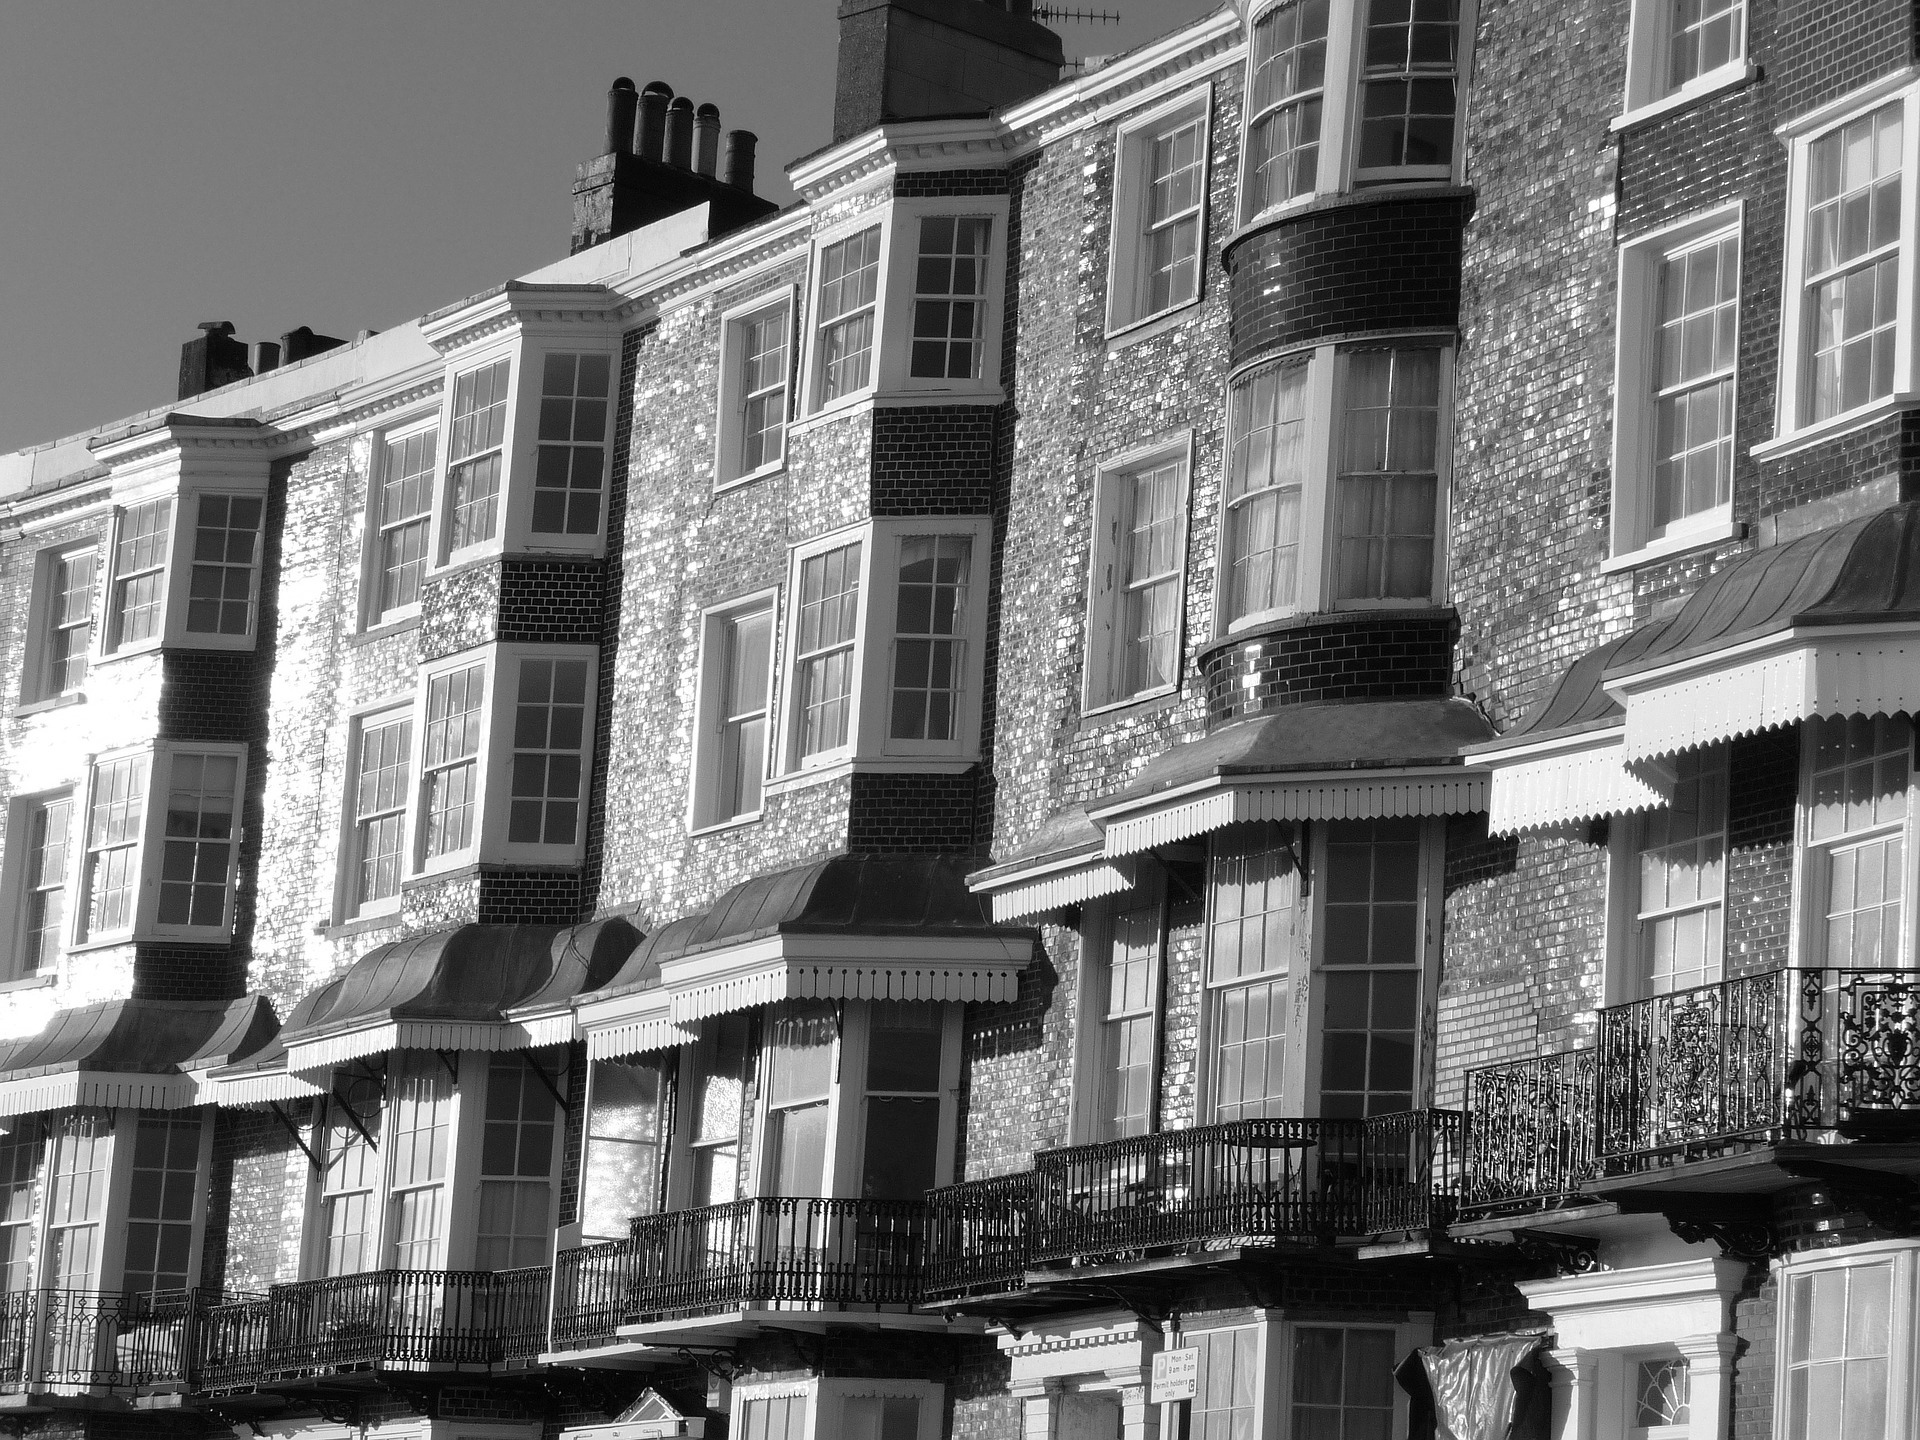 House Prices; What’s Next for An Increasingly Unpredictable Market?